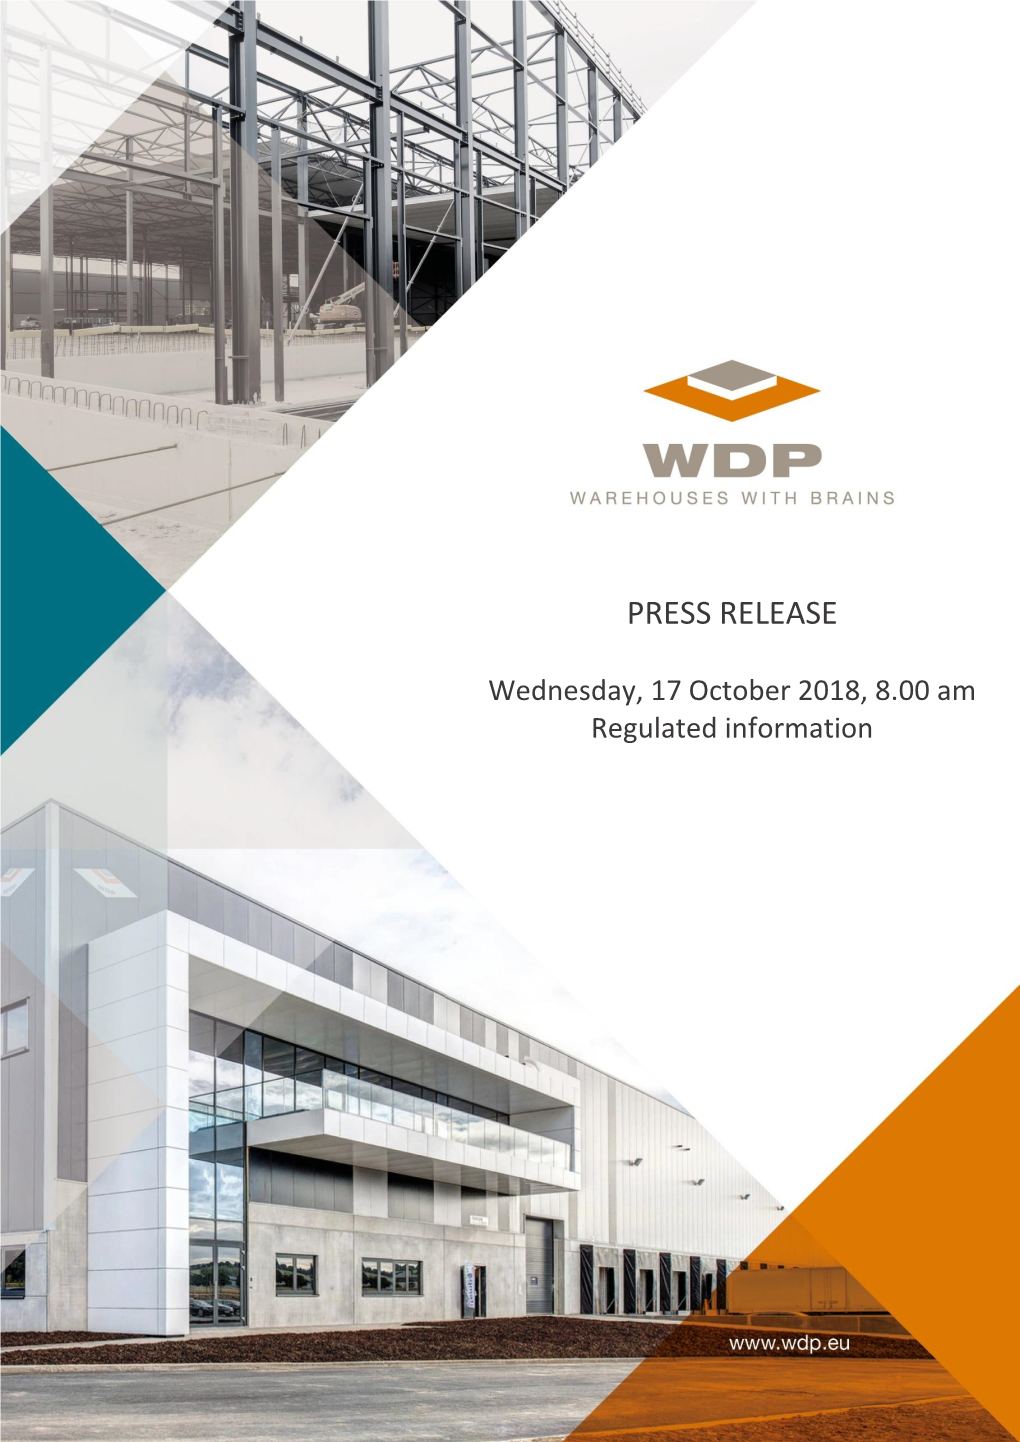 WDP Realises Acquisition of Additional Site in Asse Via Capital Increase of 12 Million Euros